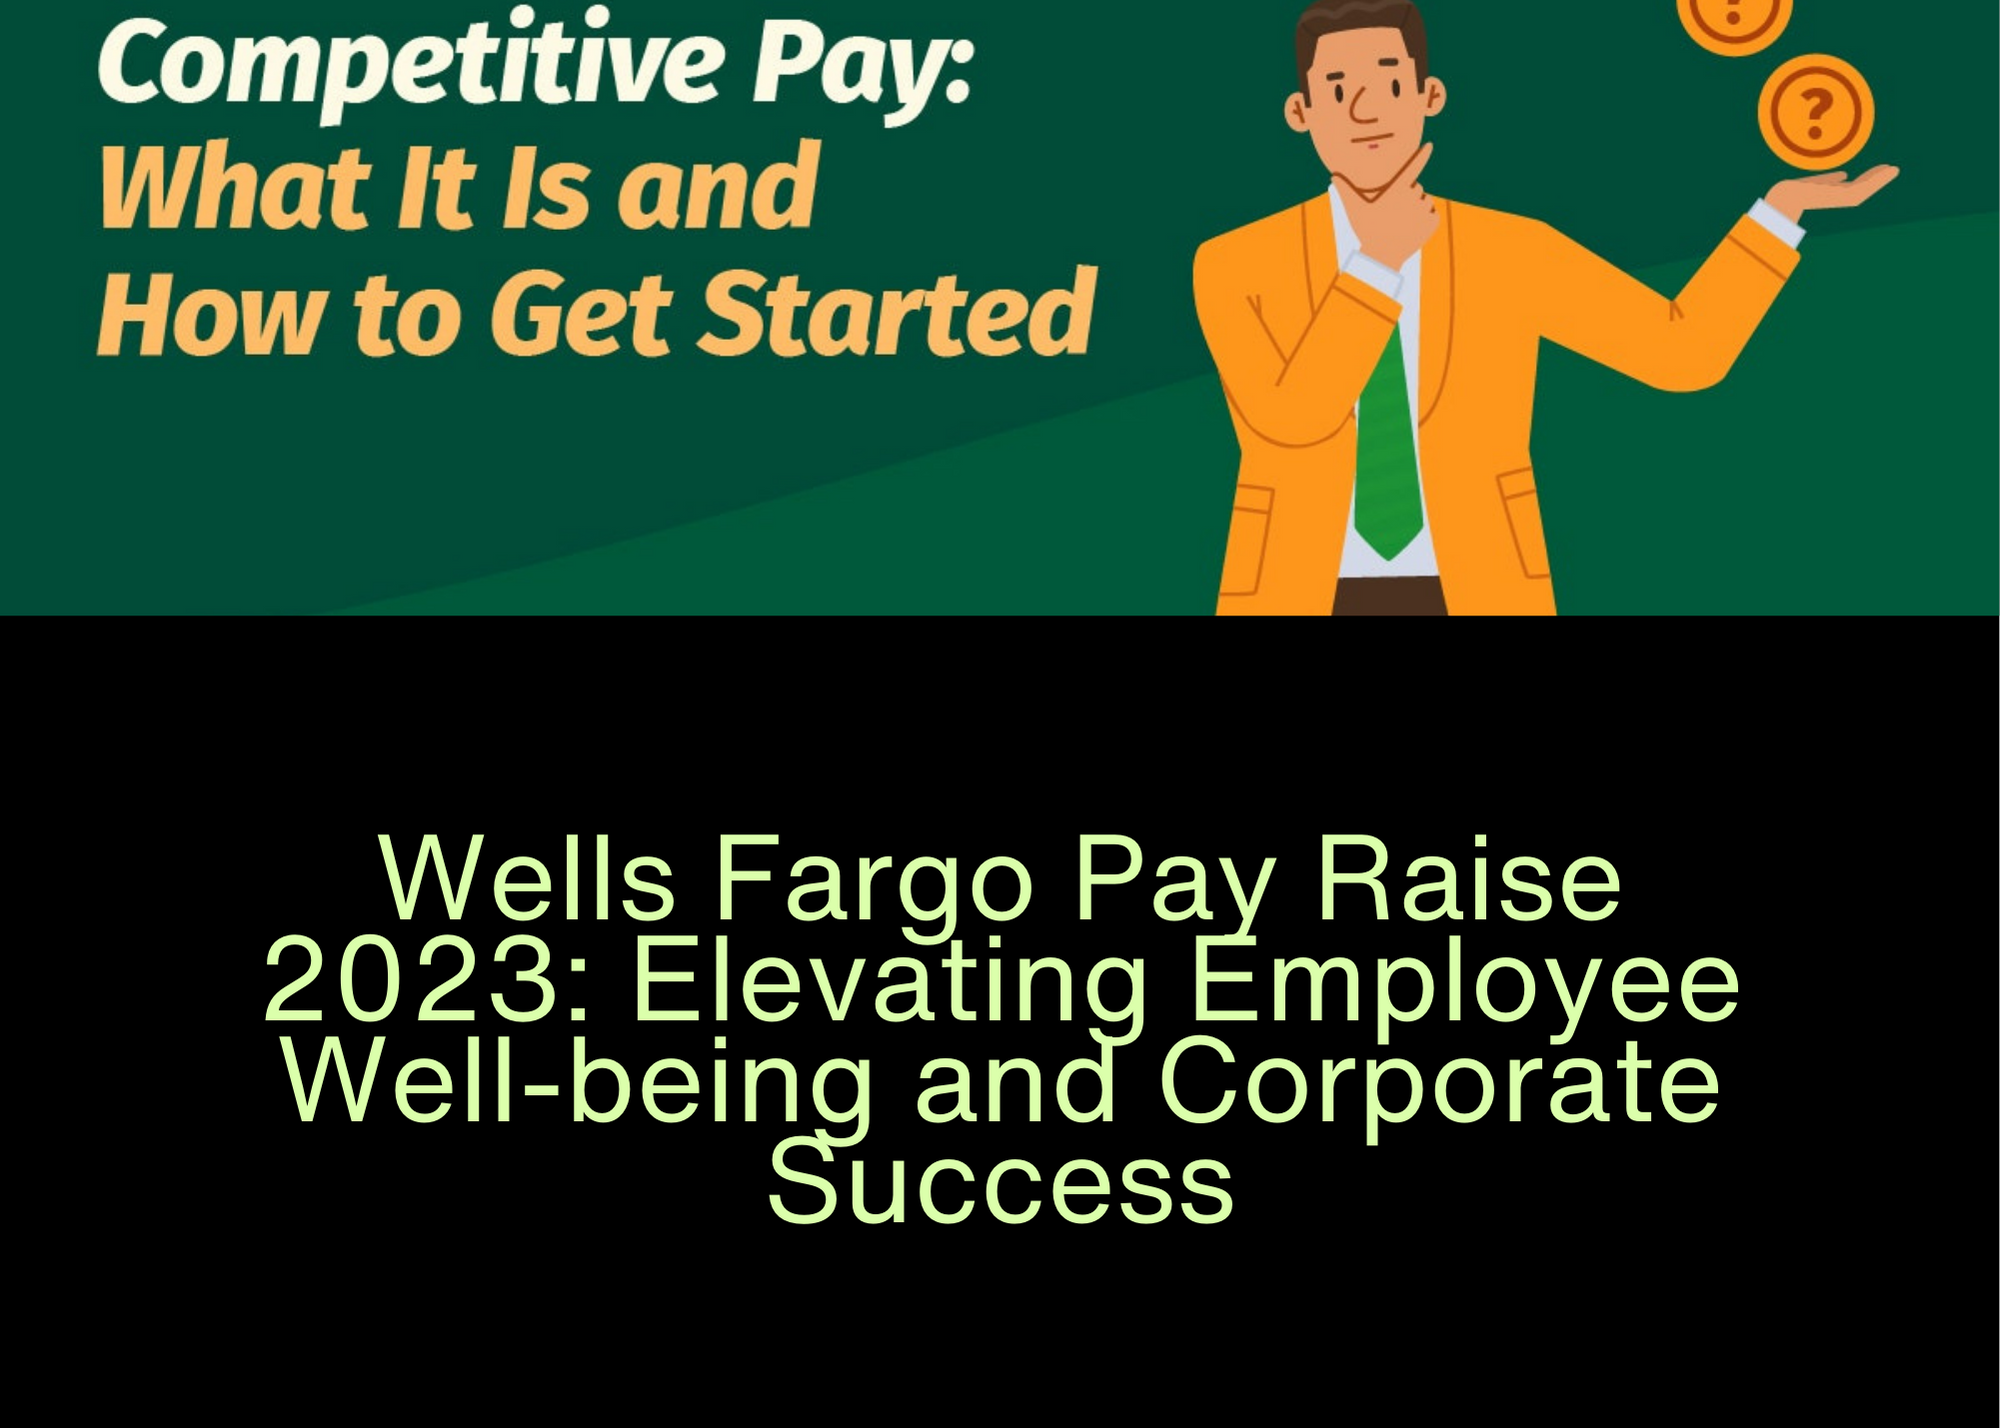 Wells Fargo Pay Raise 2023: Elevating Employee Well-being and Corporate Success